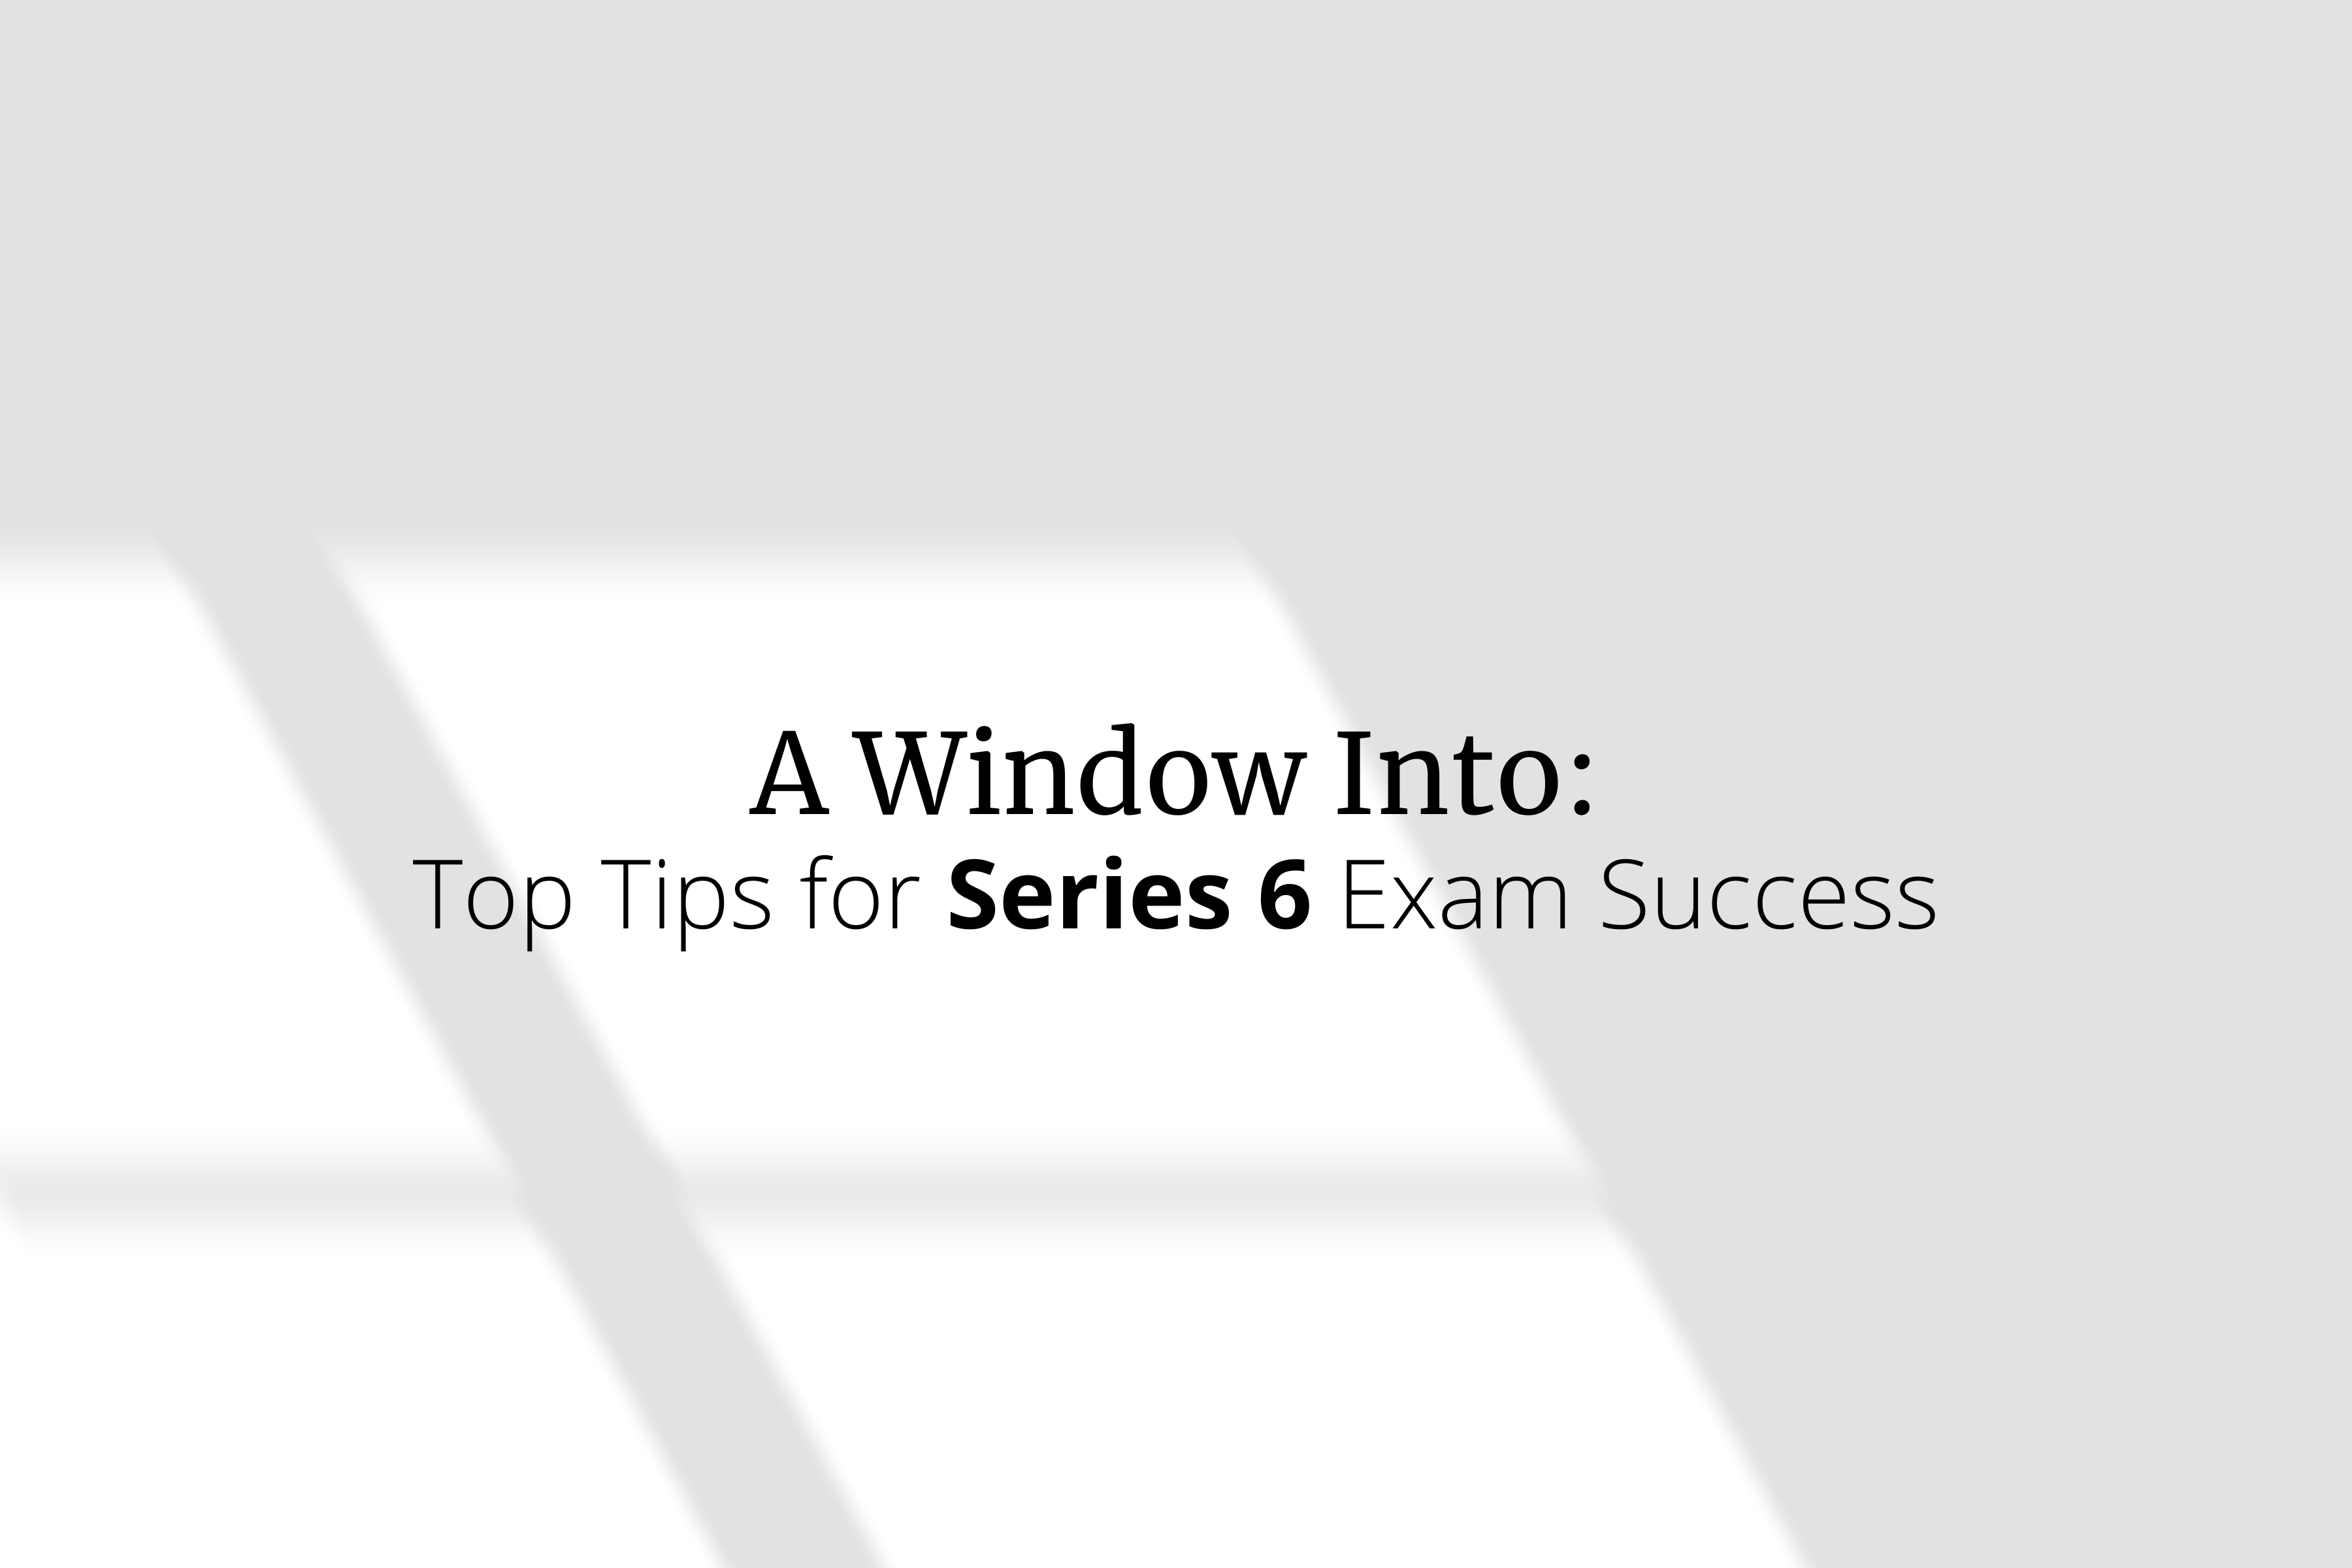 Top Tips for Series 6 Exam Success